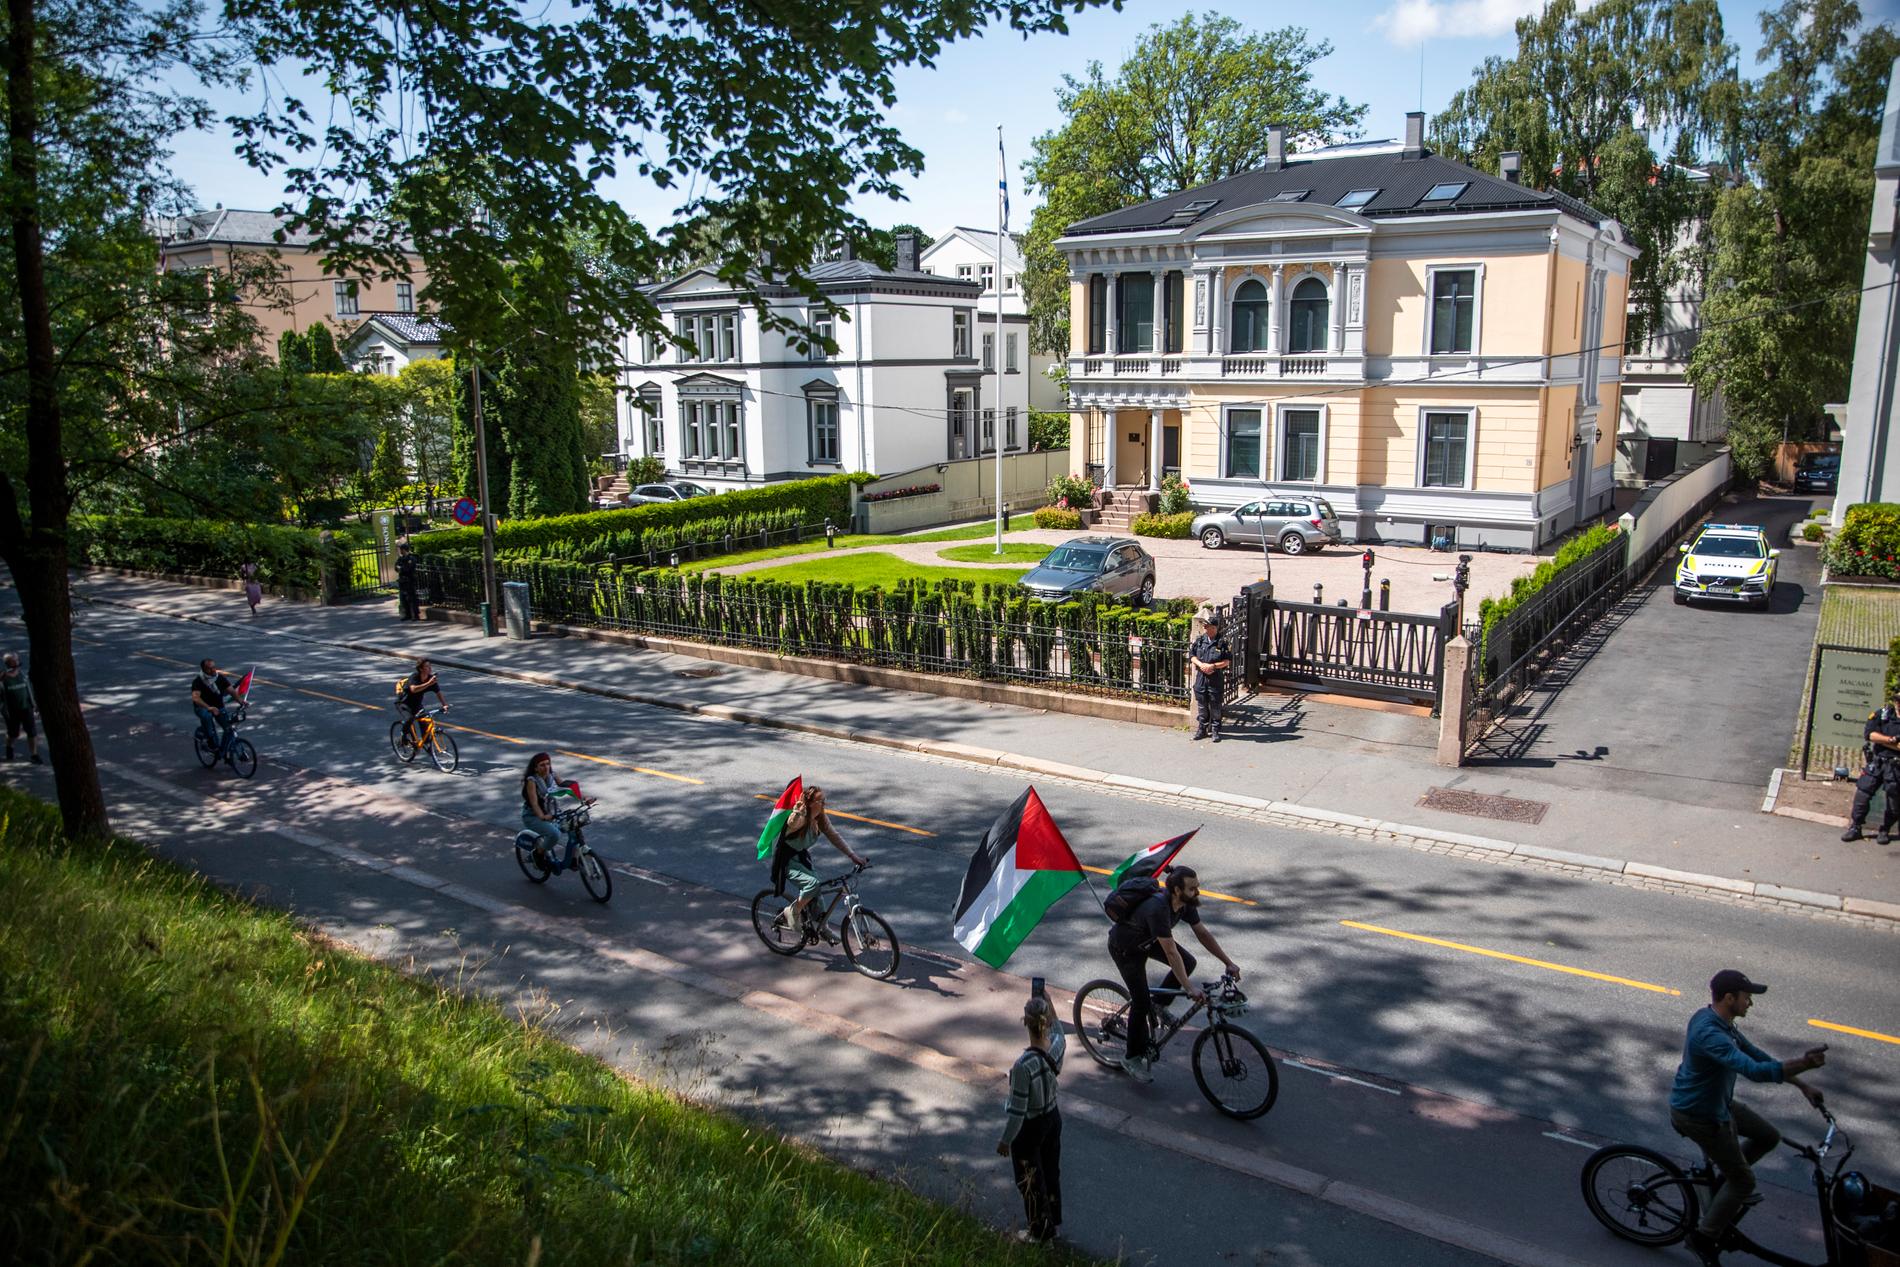 Tag: In July, the Palestine Committee placed a tag in front of the Israeli embassy located in Parkveen in Oslo.  Avi Nir Feldklein is Israel's ambassador to Norway.